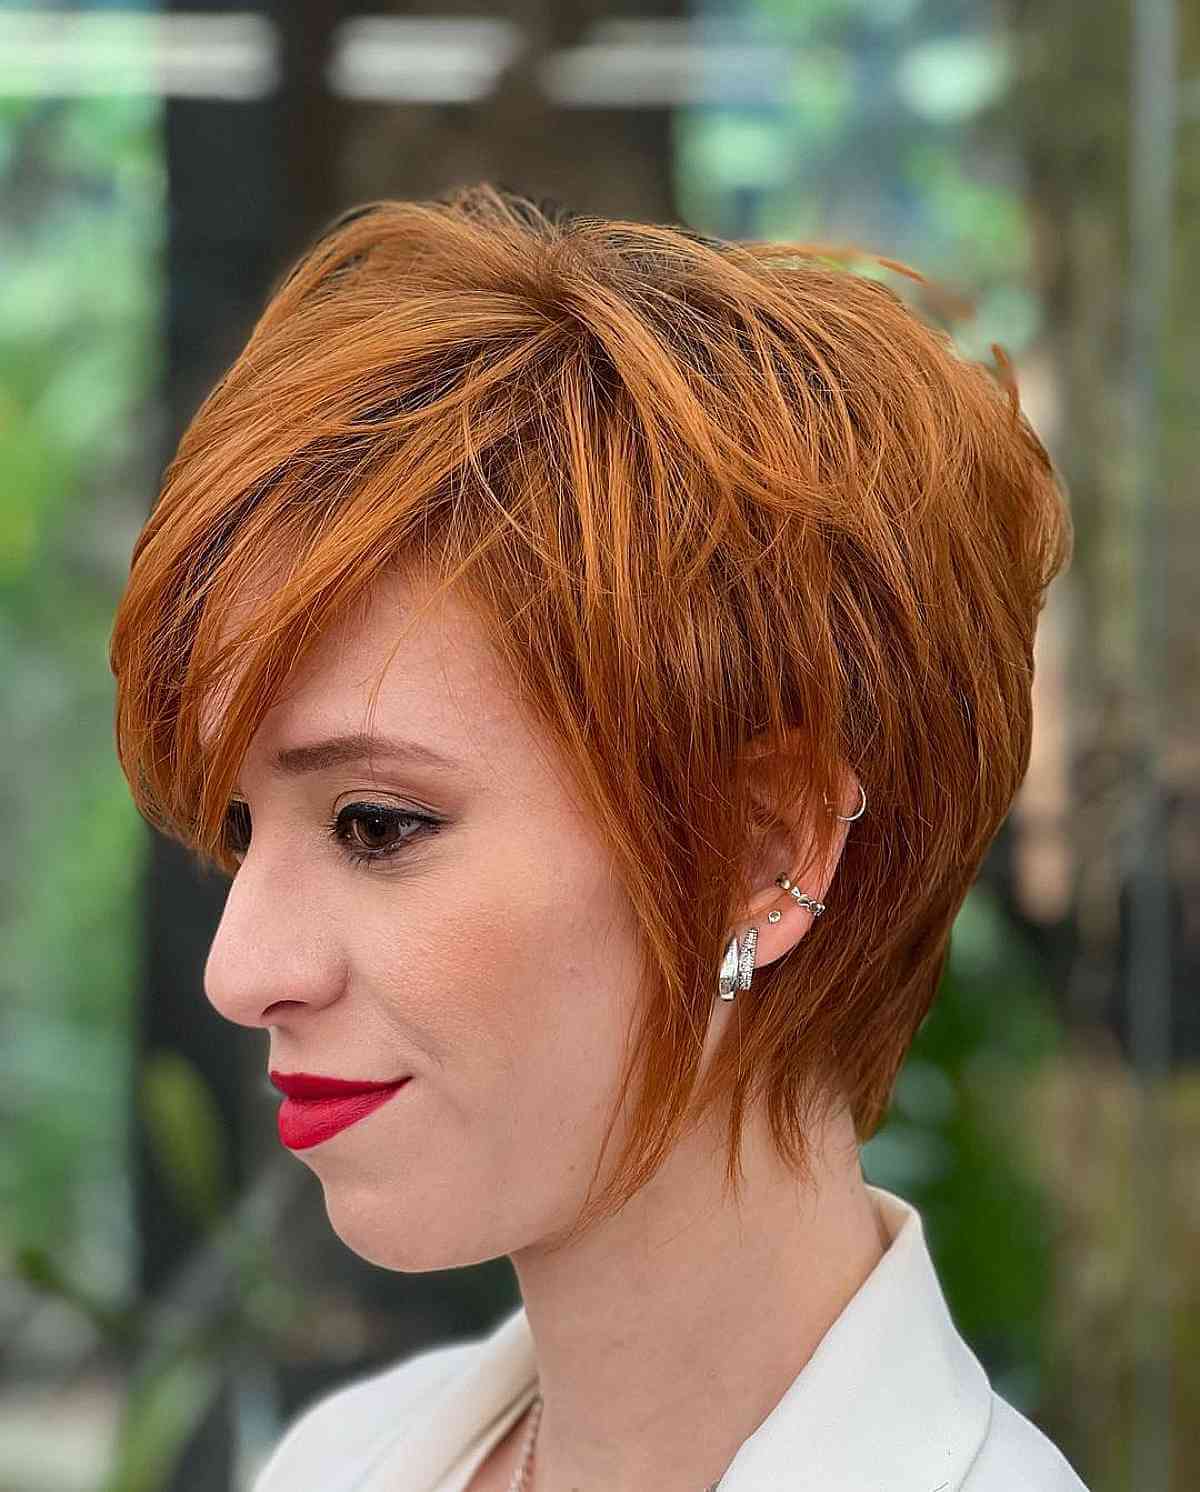 Shaggy Pixie Cut with Side Bangs